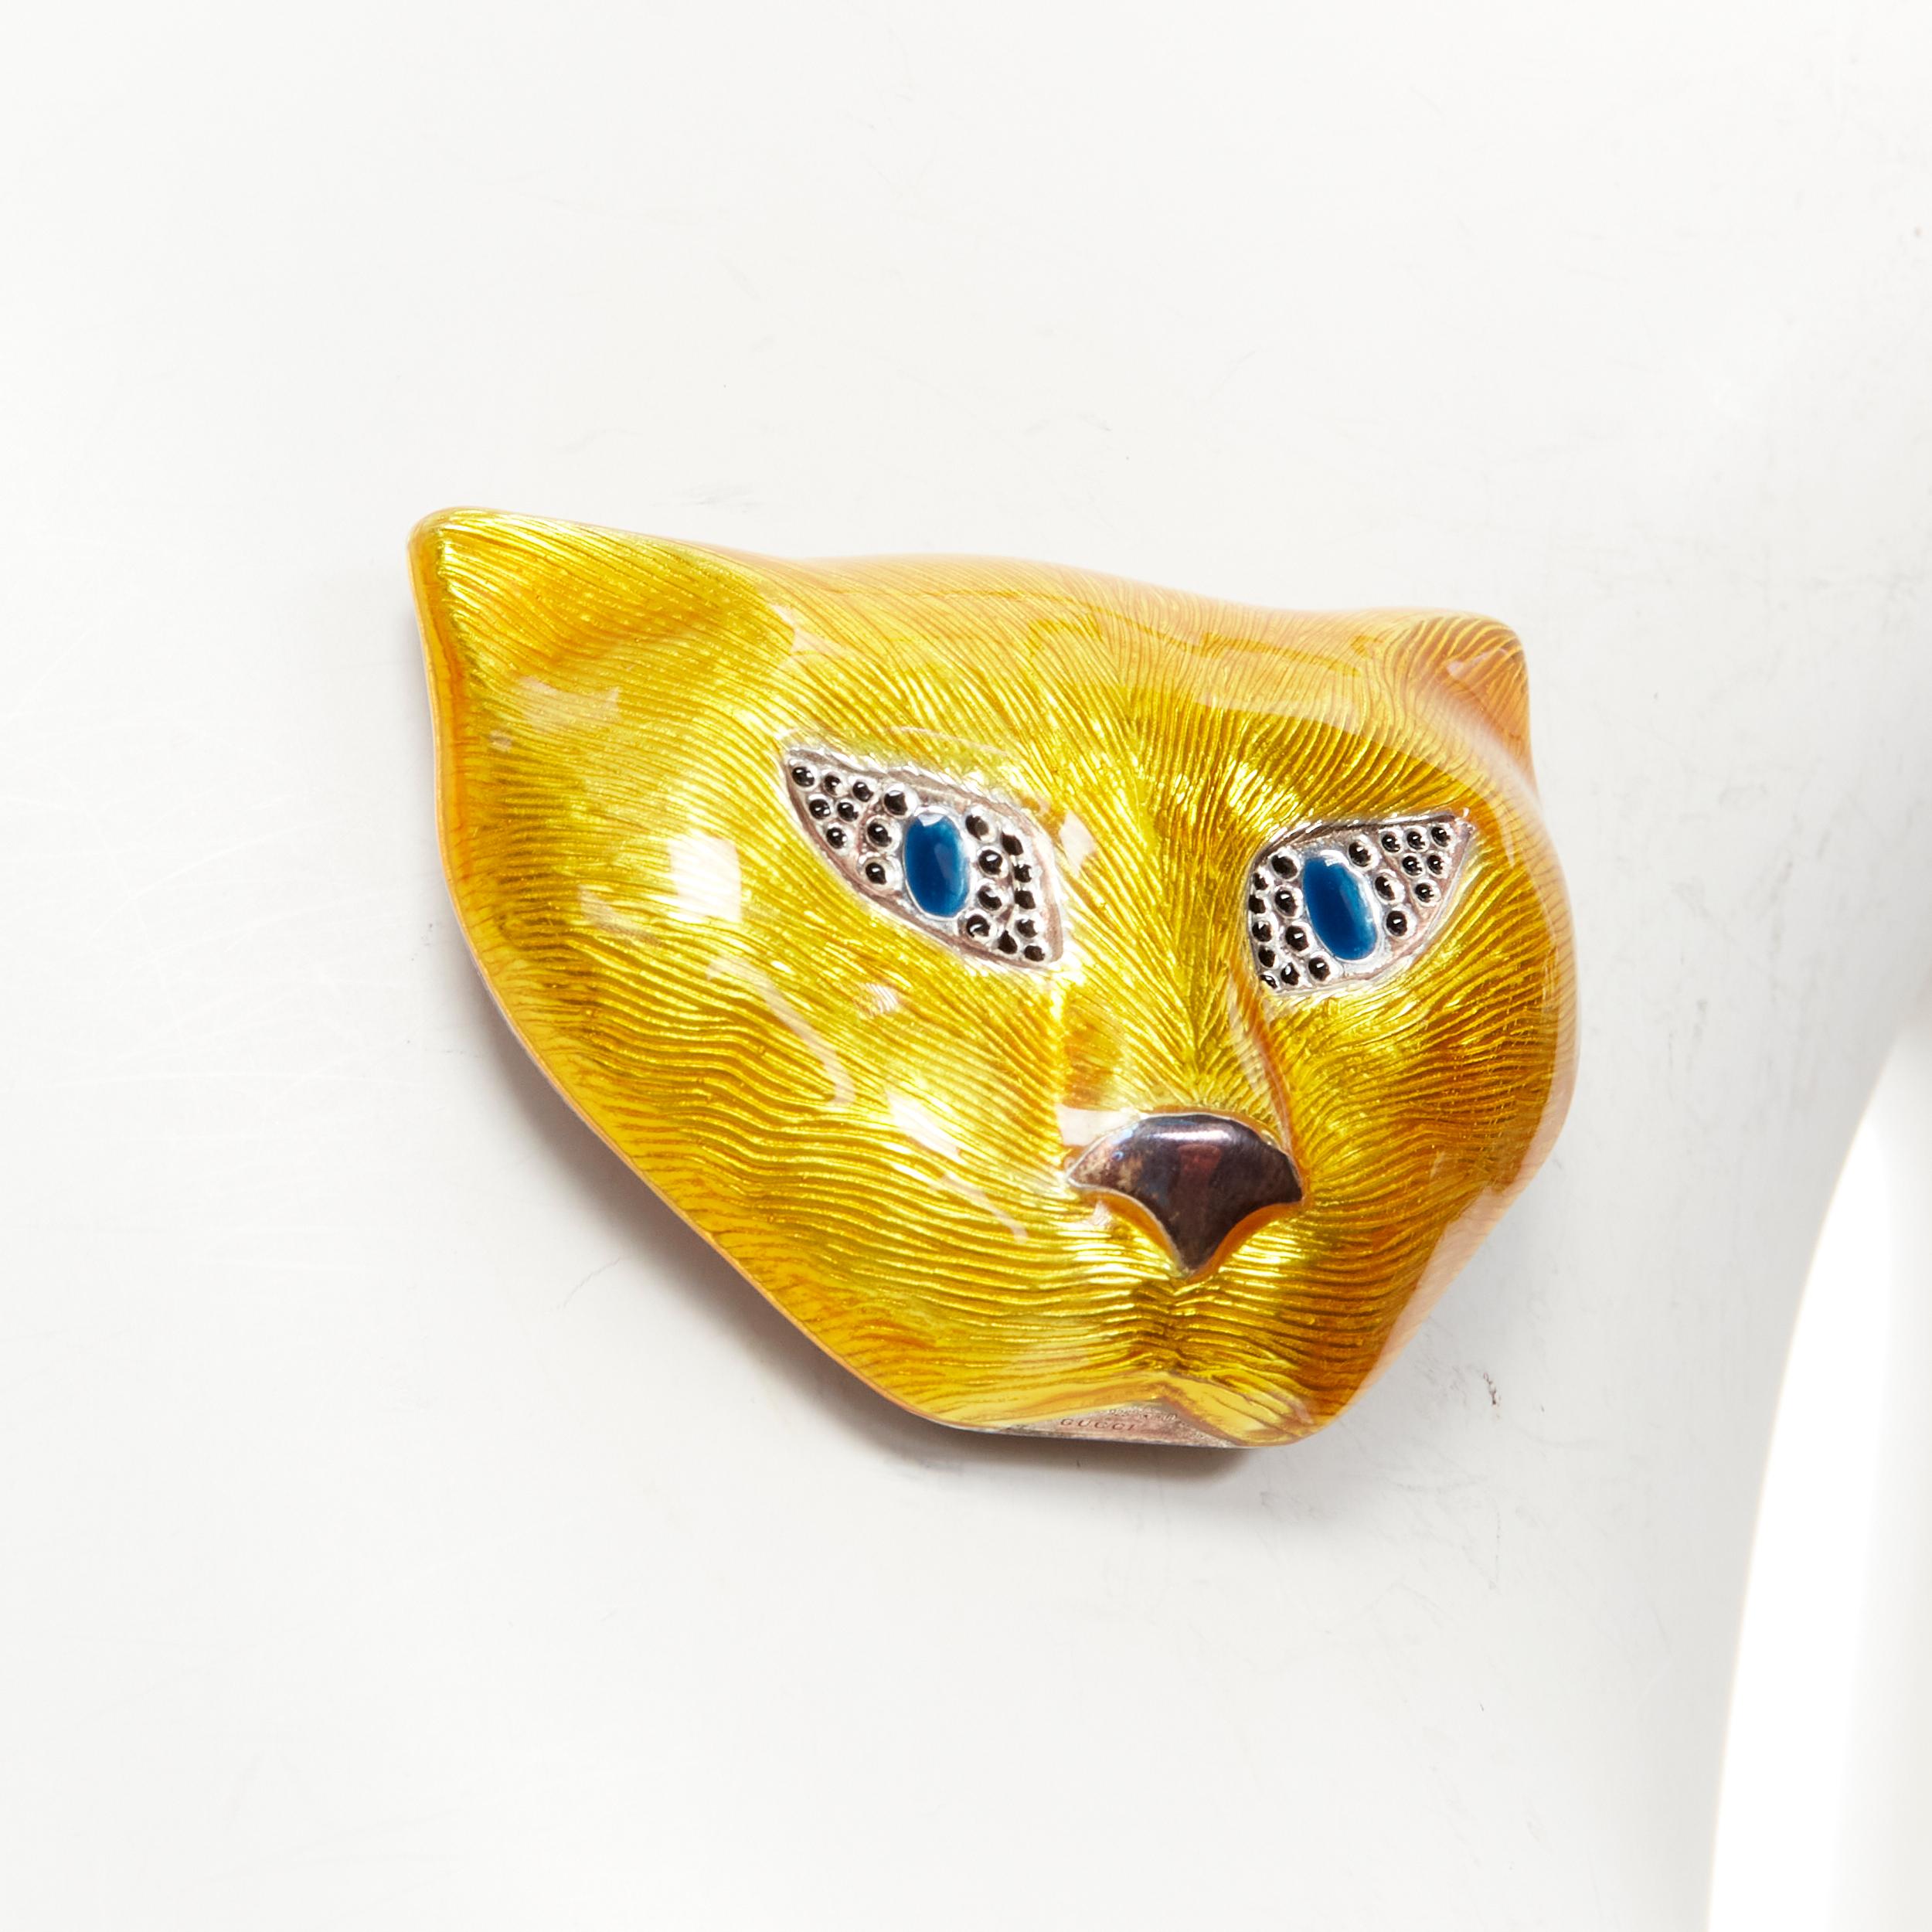 new GUCCI Alessandro Michele yellow cat enamel brush texture antique pin brooch
Reference: TGAS/C01657
Brand: Gucci
Designer: Alessandro Michele
Model: 
Material: Metal
Color: Yellow
Pattern: Solid
Closure: Safety Pin

CONDITION:
Condition: New